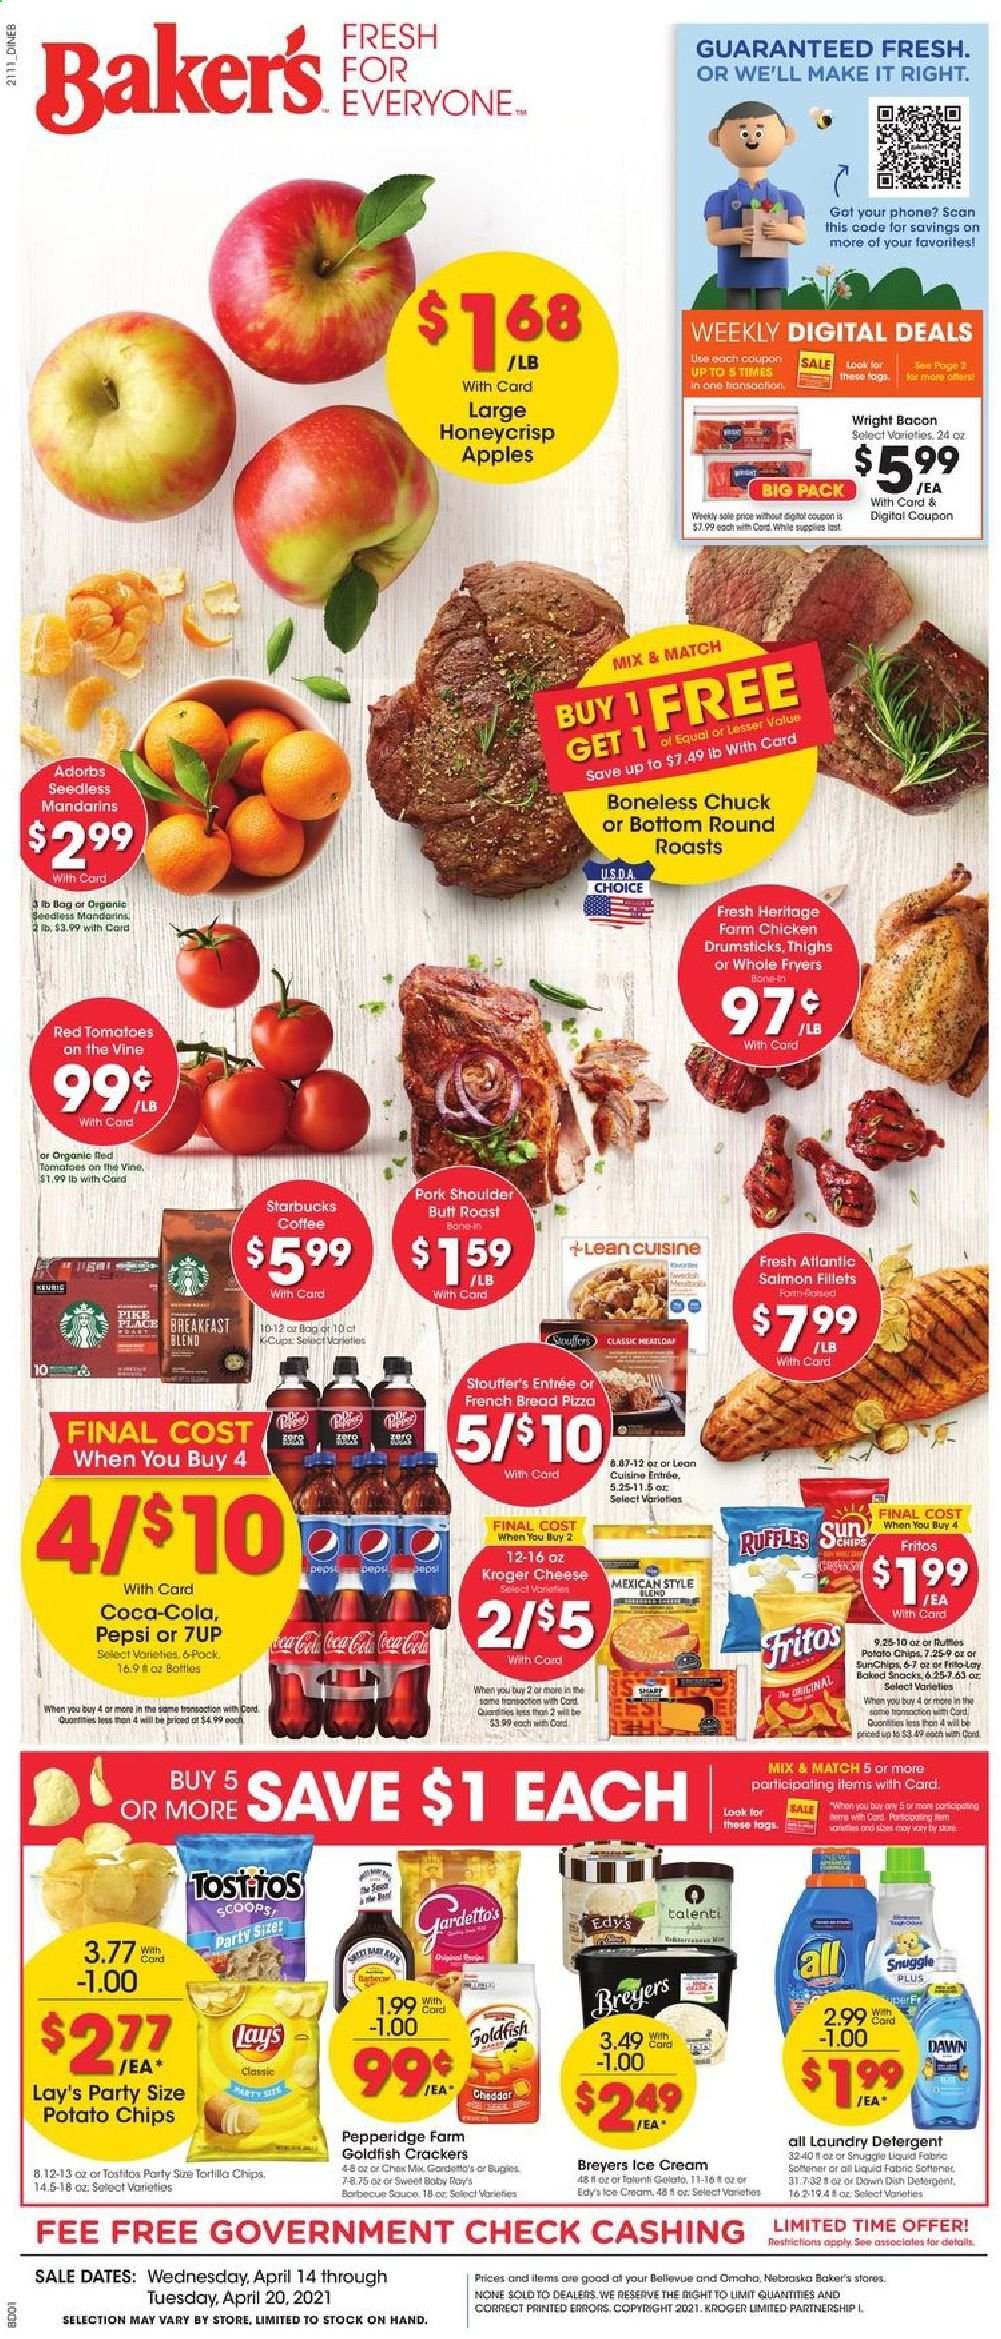 thumbnail - Baker's Flyer - 04/14/2021 - 04/20/2021 - Sales products - bread, tomatoes, apples, mandarines, salmon, salmon fillet, pizza, Lean Cuisine, bacon, ice cream, Talenti Gelato, gelato, Stouffer's, crackers, Fritos, tortilla chips, potato chips, chips, Lay’s, Goldfish, Ruffles, Tostitos, Coca-Cola, Pepsi, 7UP, coffee, Starbucks, chicken drumsticks, pork meat, pork shoulder, detergent, Snuggle, laundry detergent, Bakers. Page 1.